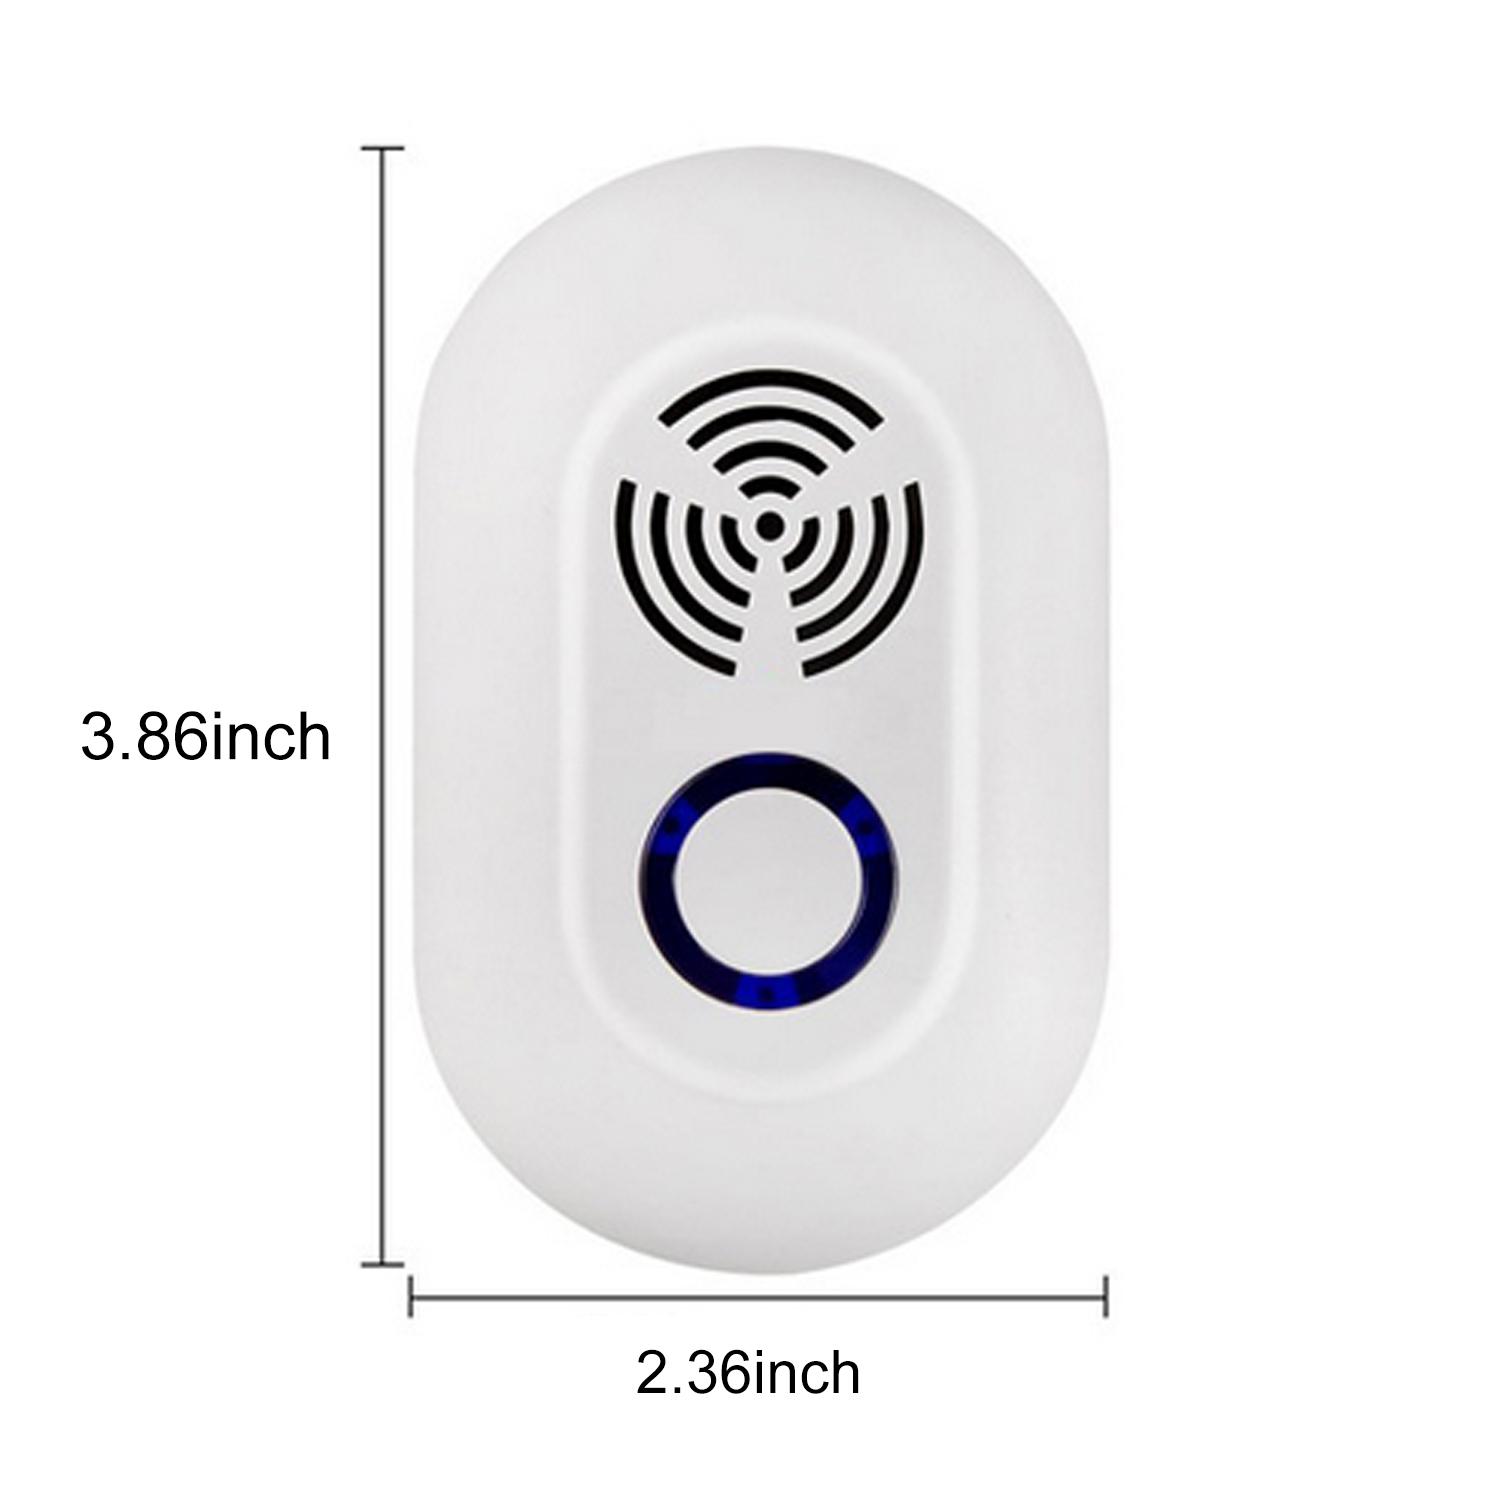 4pcs Electronic Ultrasonic Pest Control Repeller in Insect Repellent for Mouse Mosquito Cockroach Cricket Bugs UK Plug - intl